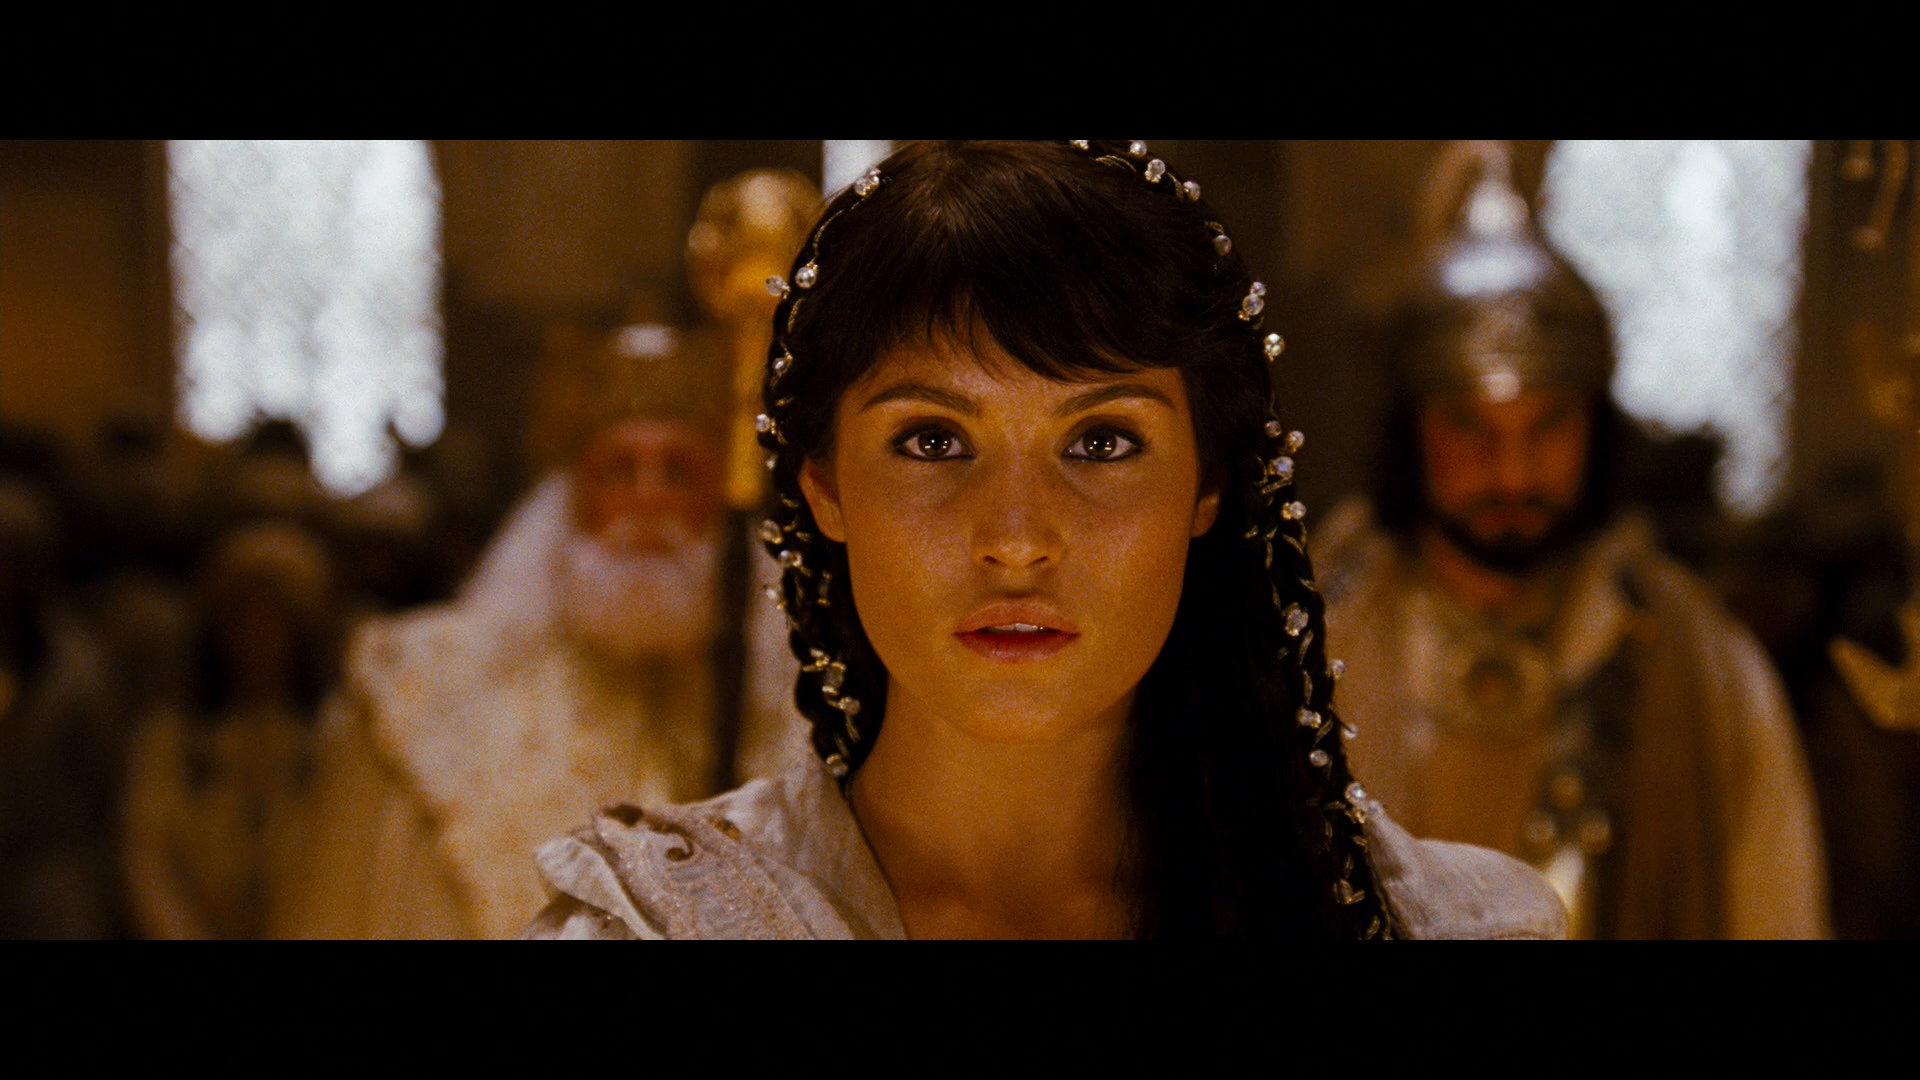 Prince Of Persia The Sands Of Time Movies Gemma Arterton 1920x1080